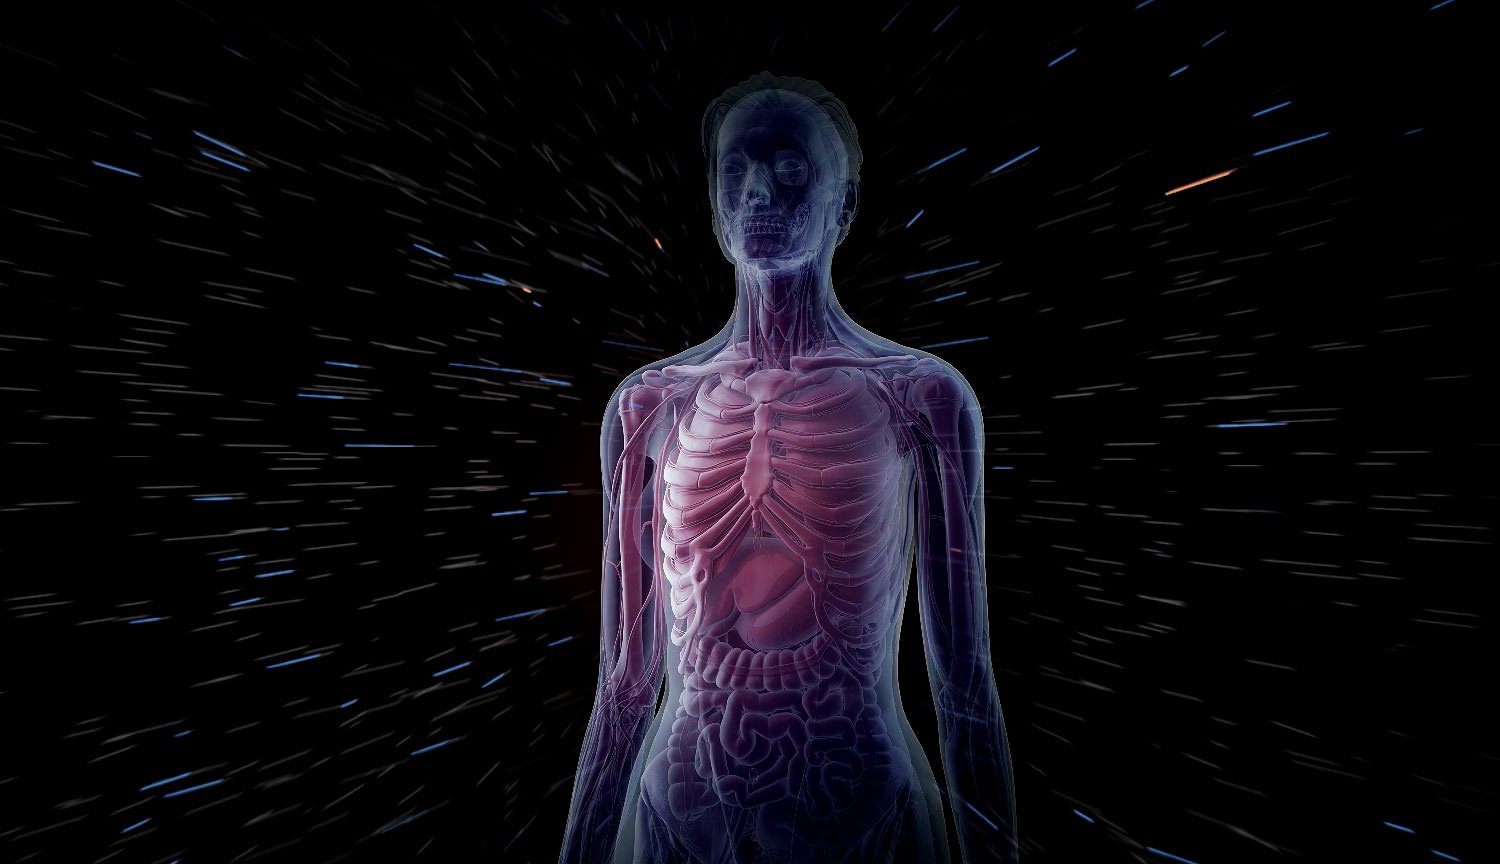 Scientists develop most detailed 3D model of the human body